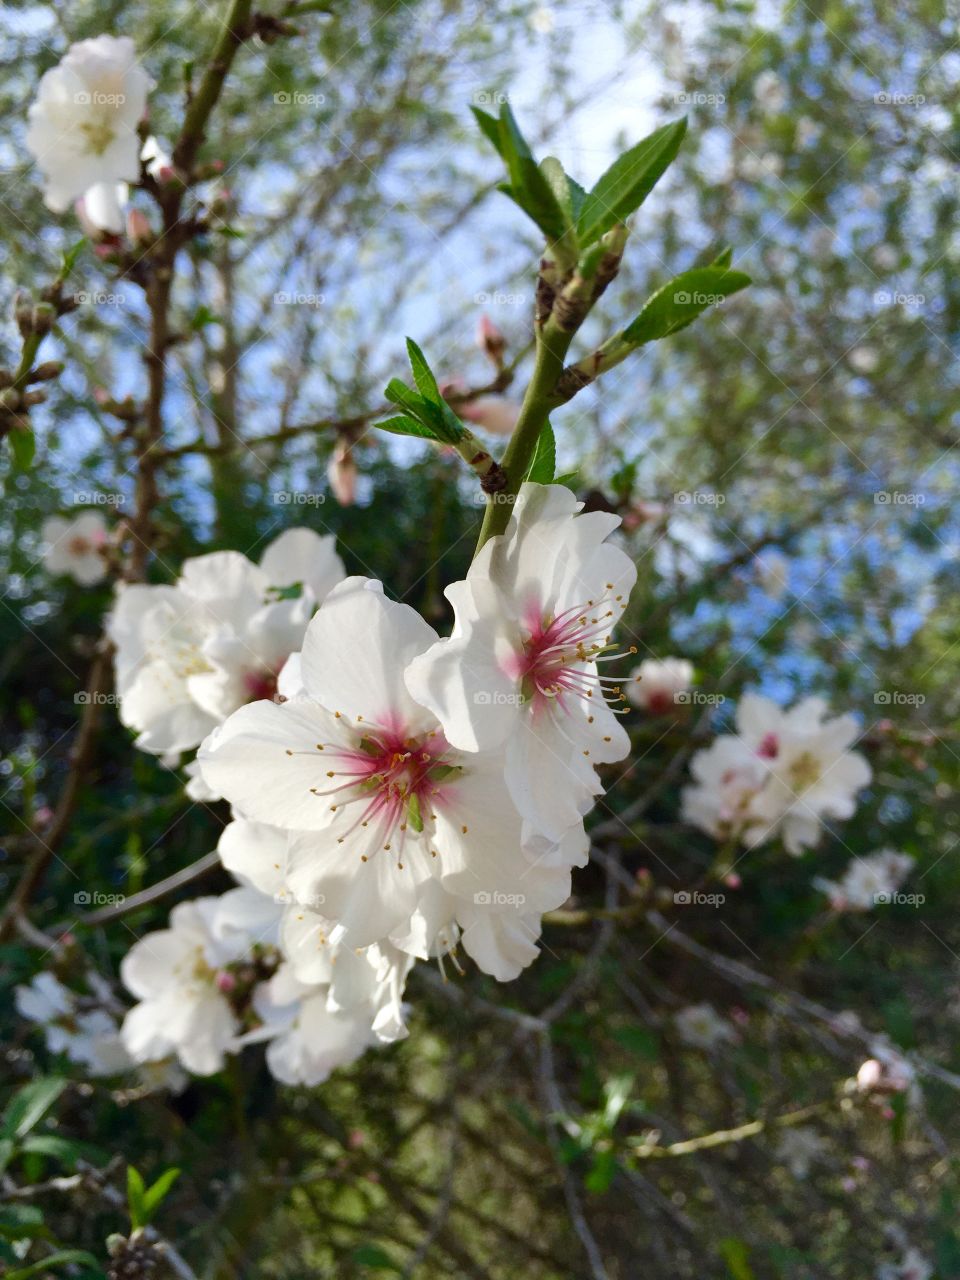 Flowering almond. white almond blossoms.  iPhone 6+